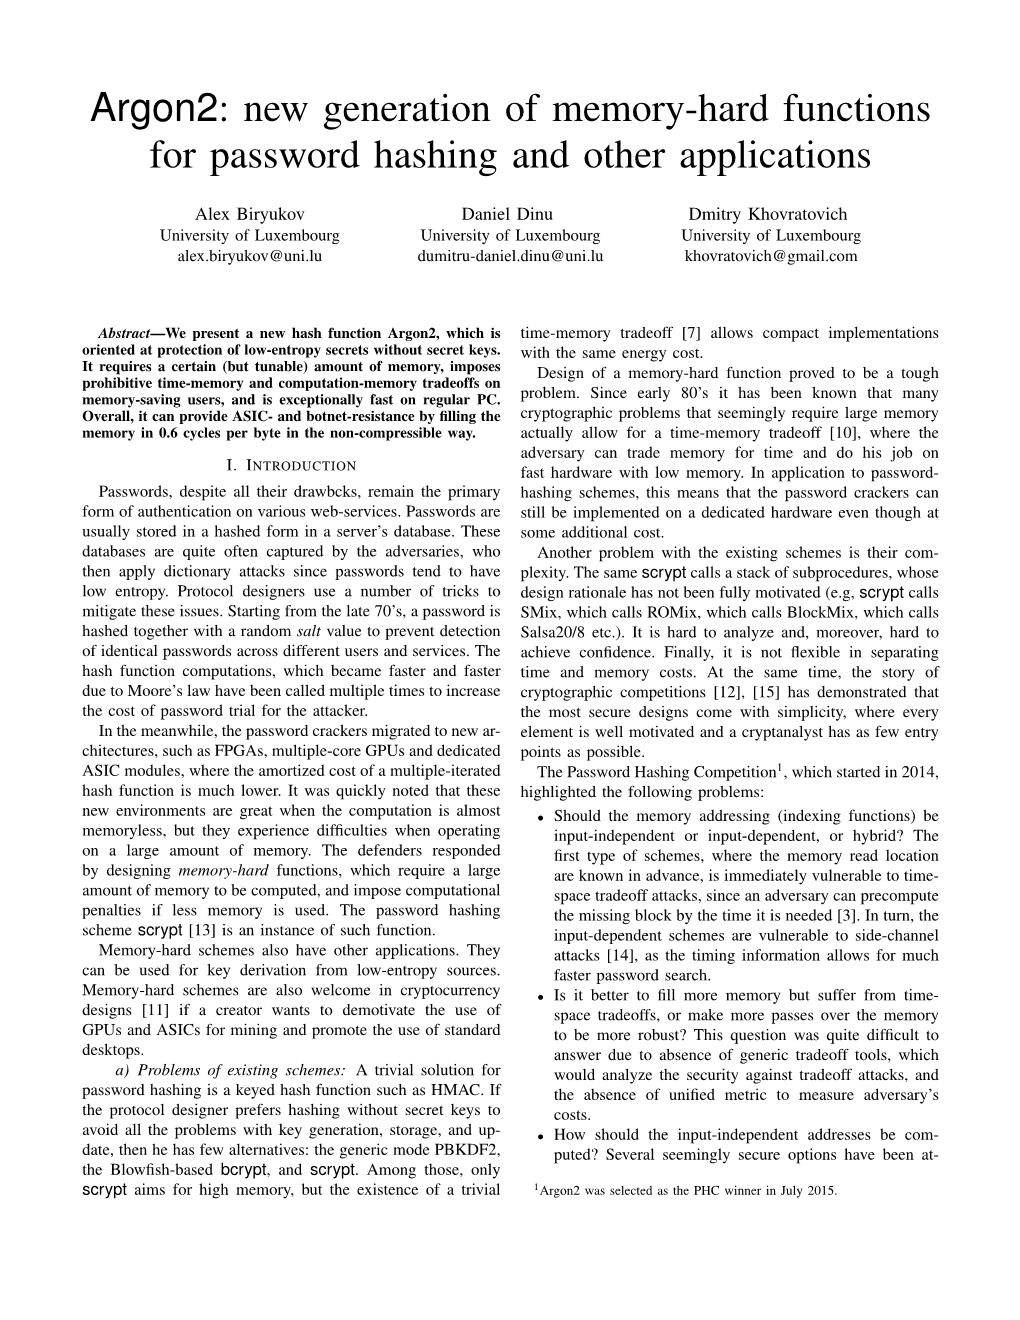 Argon2: New Generation of Memory-Hard Functions for Password Hashing and Other Applications